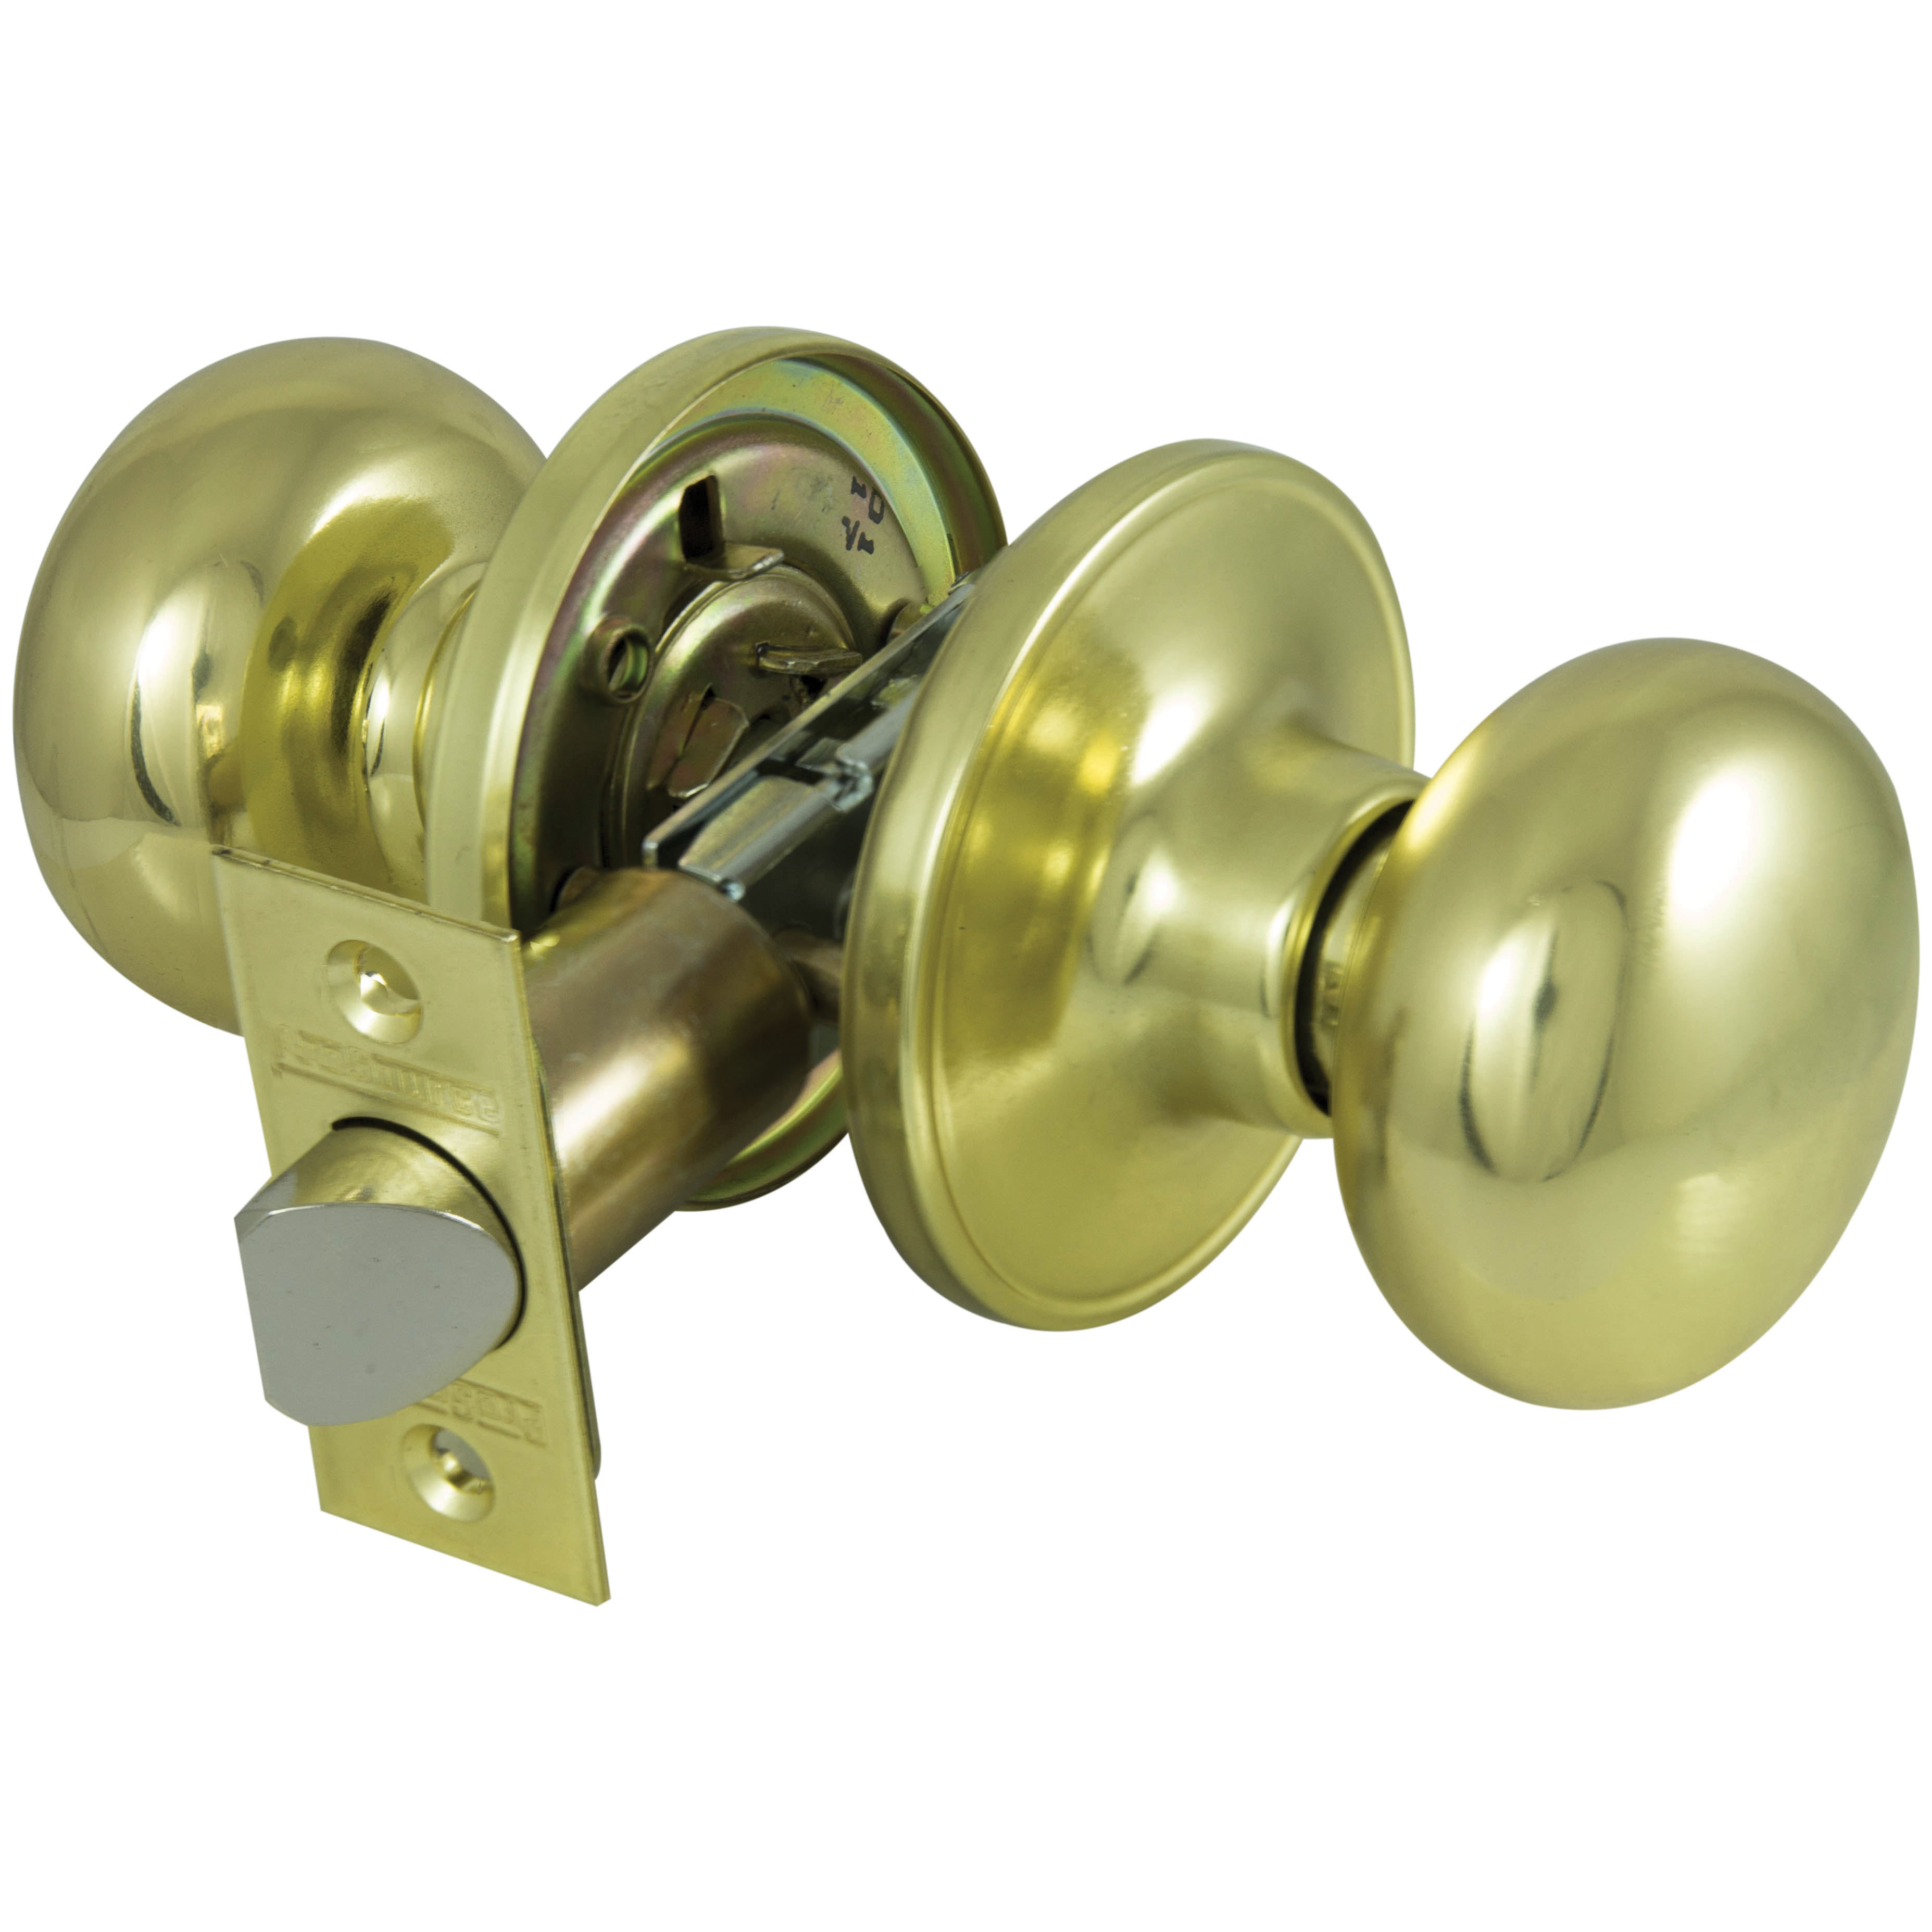 TF730V-PS Passage Knob, Metal, Polished Brass, 2-3/8 to 2-3/4 in Backset, 1-3/8 to 1-3/4 in Thick Door